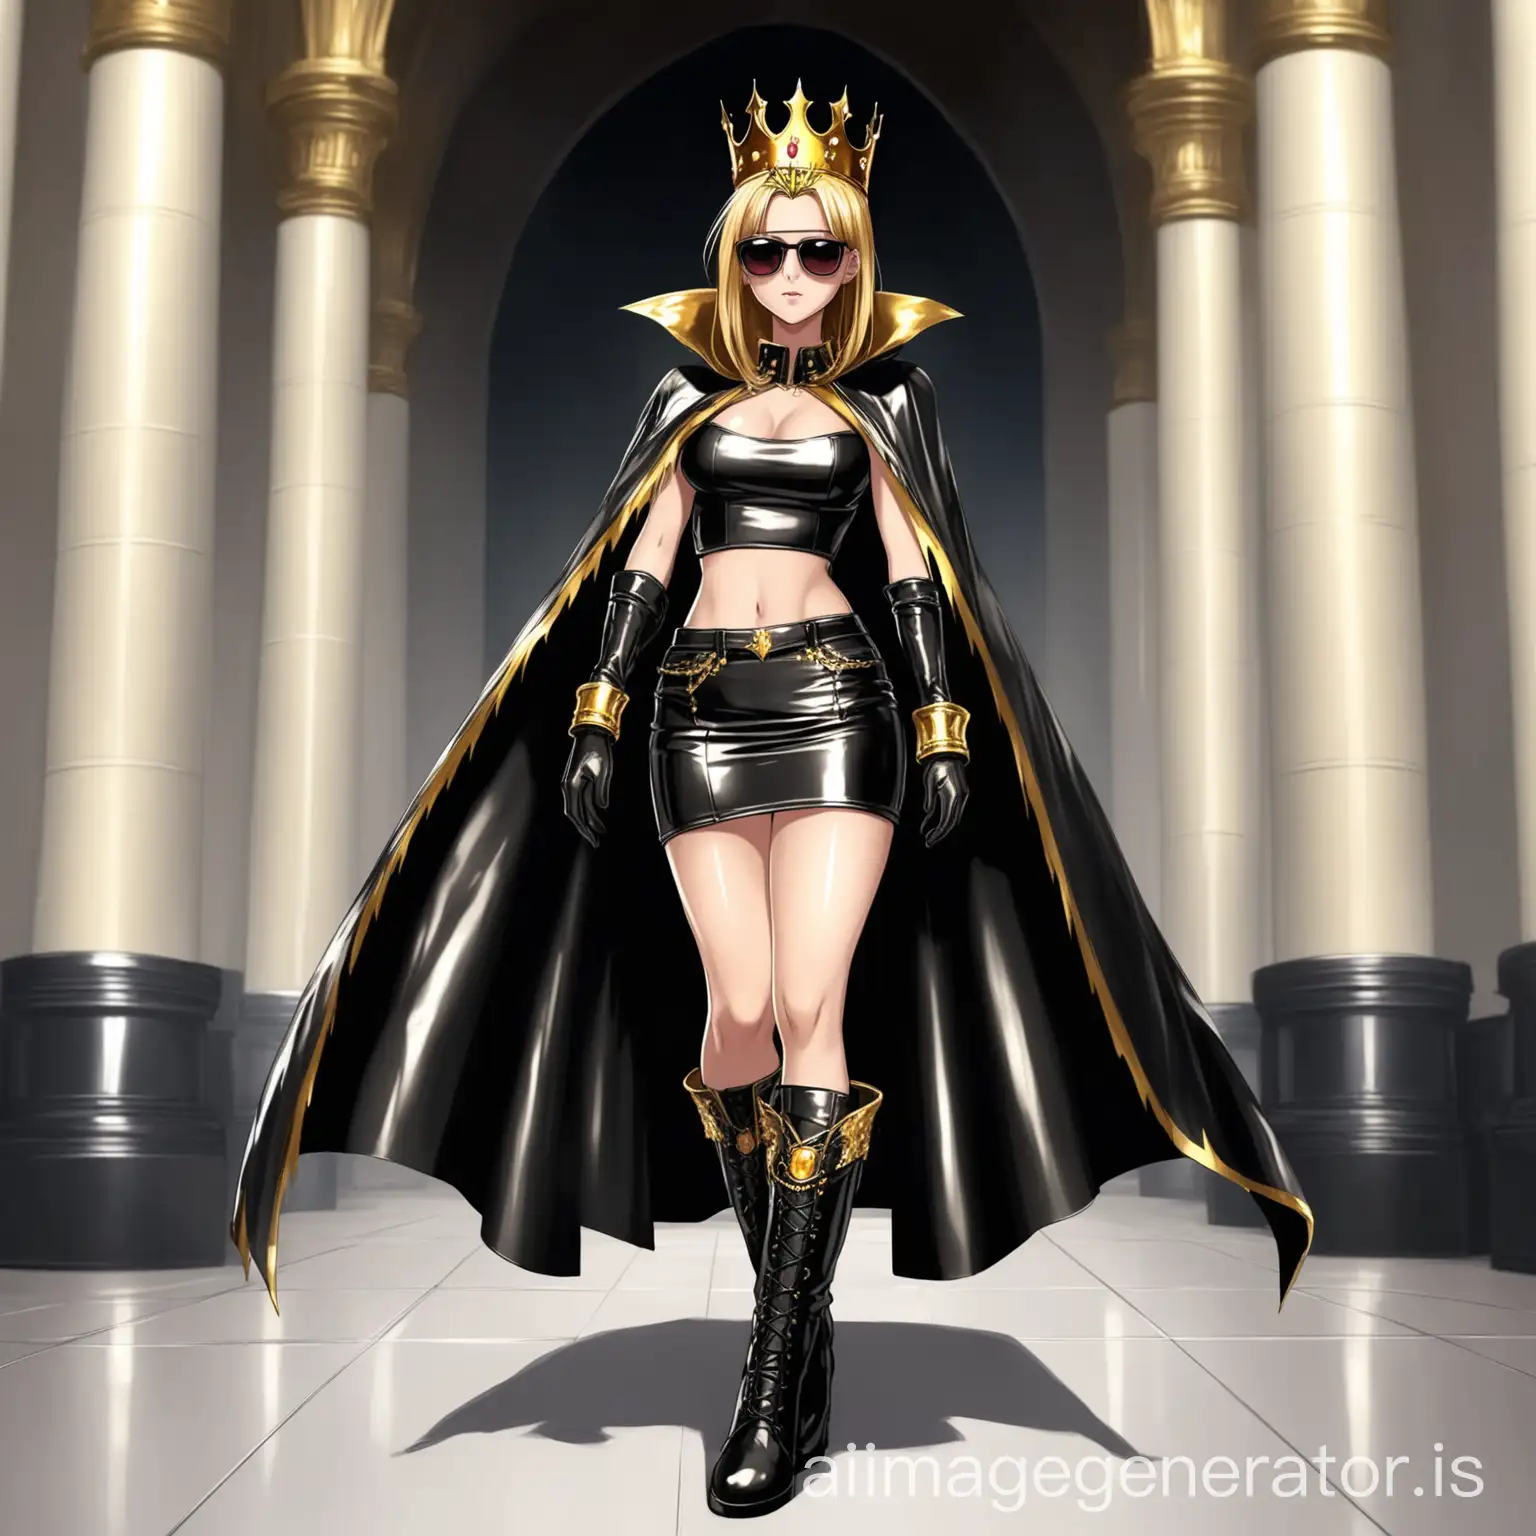 Stylish-Anime-Girl-Fashion-Leather-Dress-Crown-and-Shades